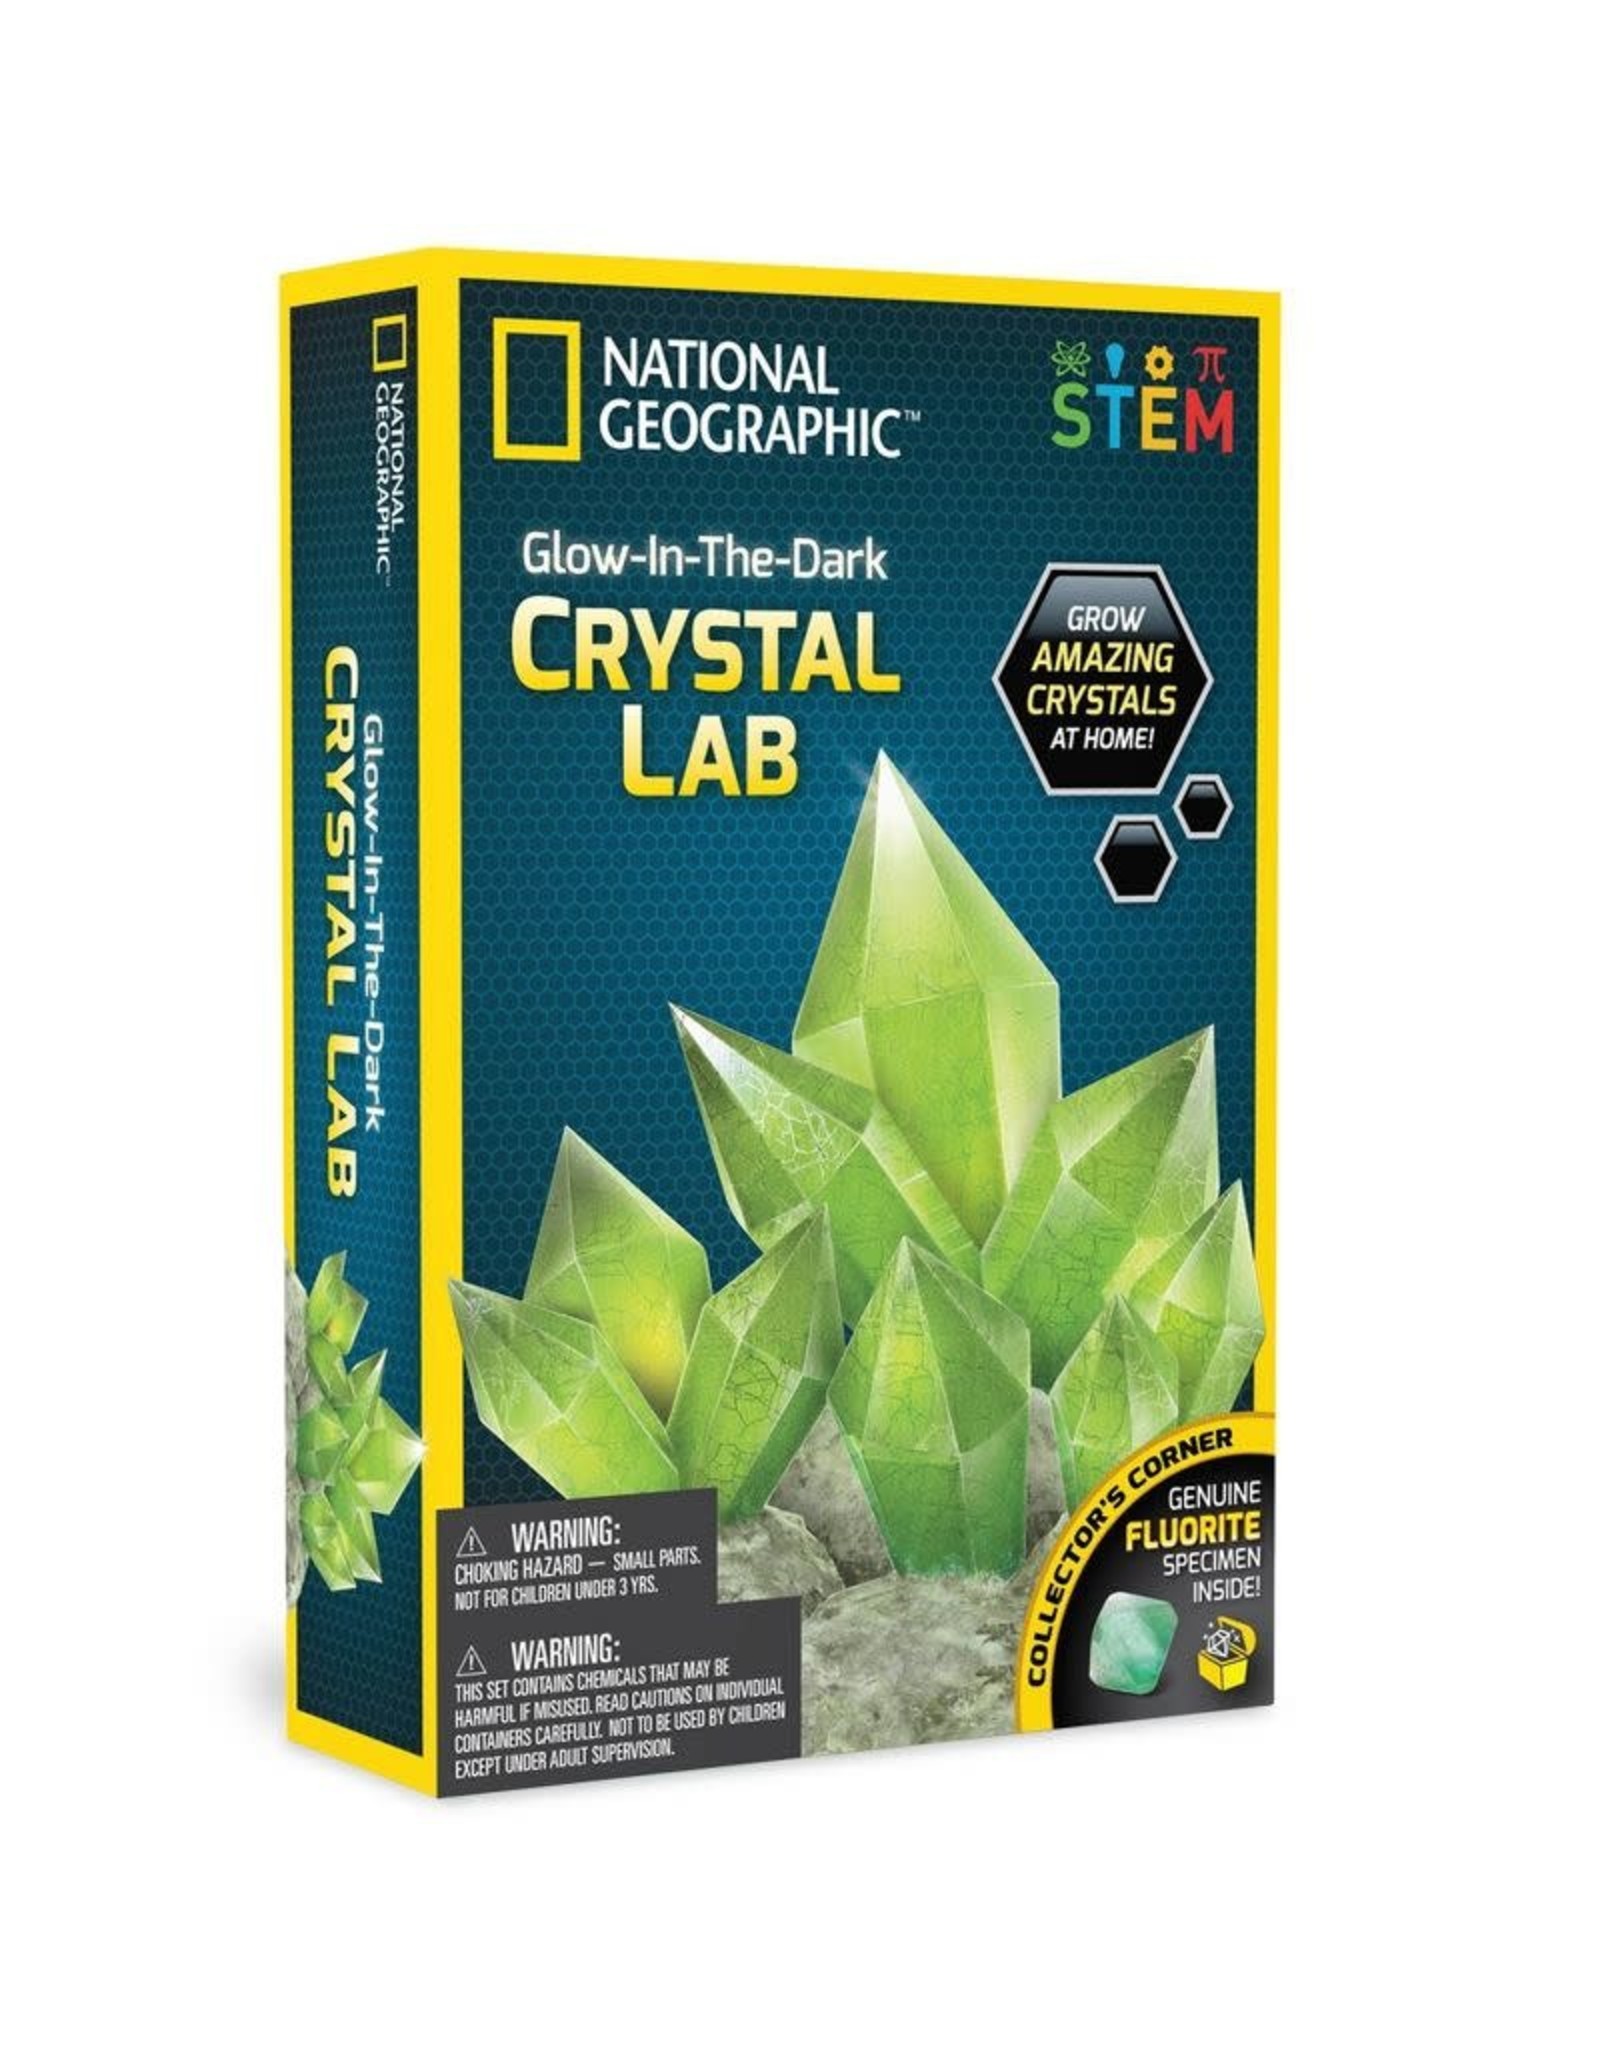 National Geographic Glow-in-the-Dark Crystal Lab